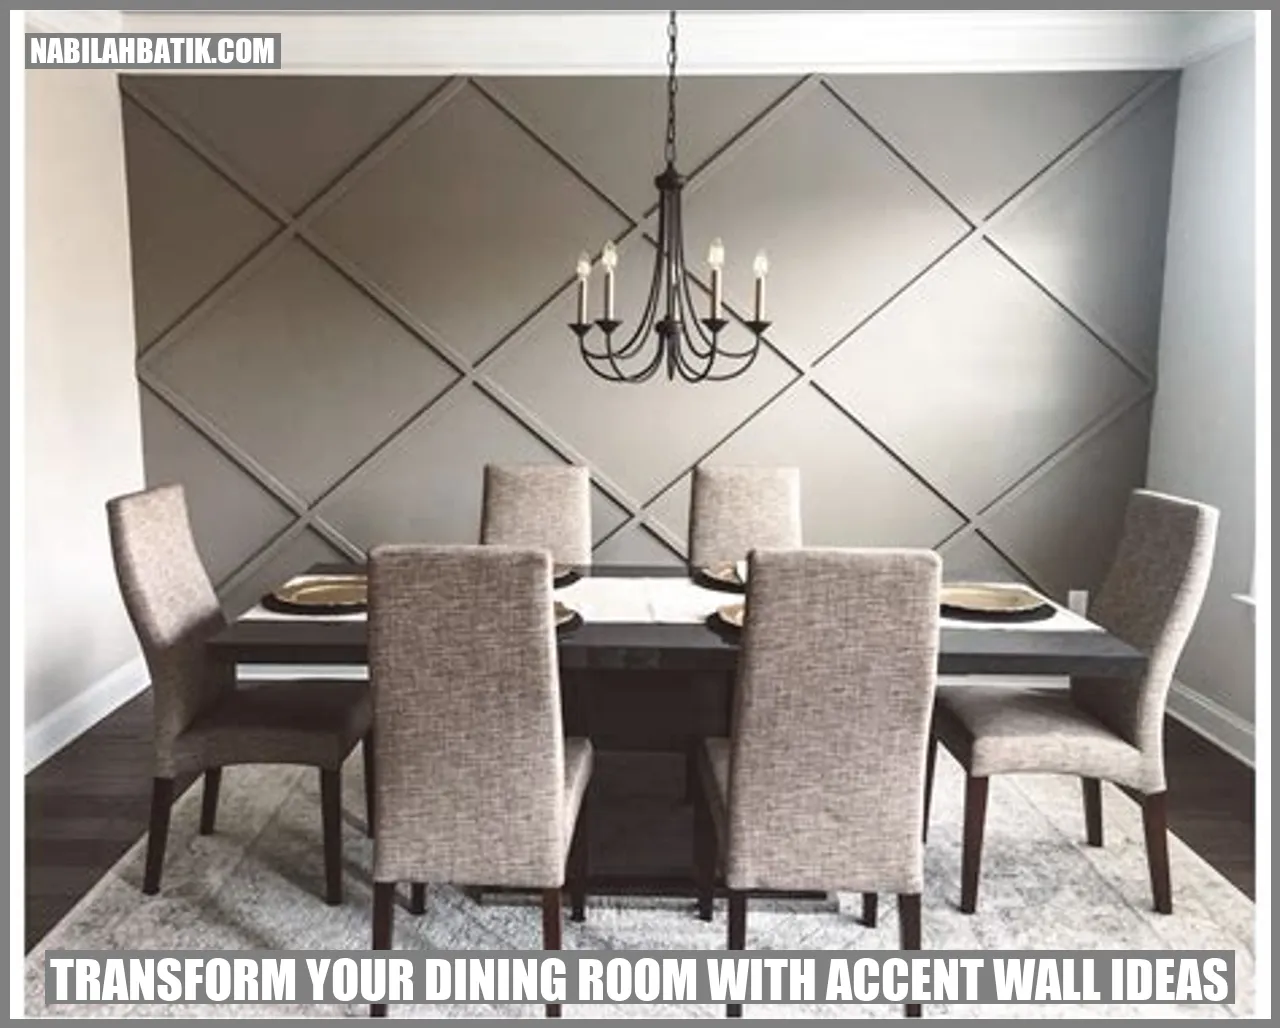 Accent Wall Ideas for the Dining Room